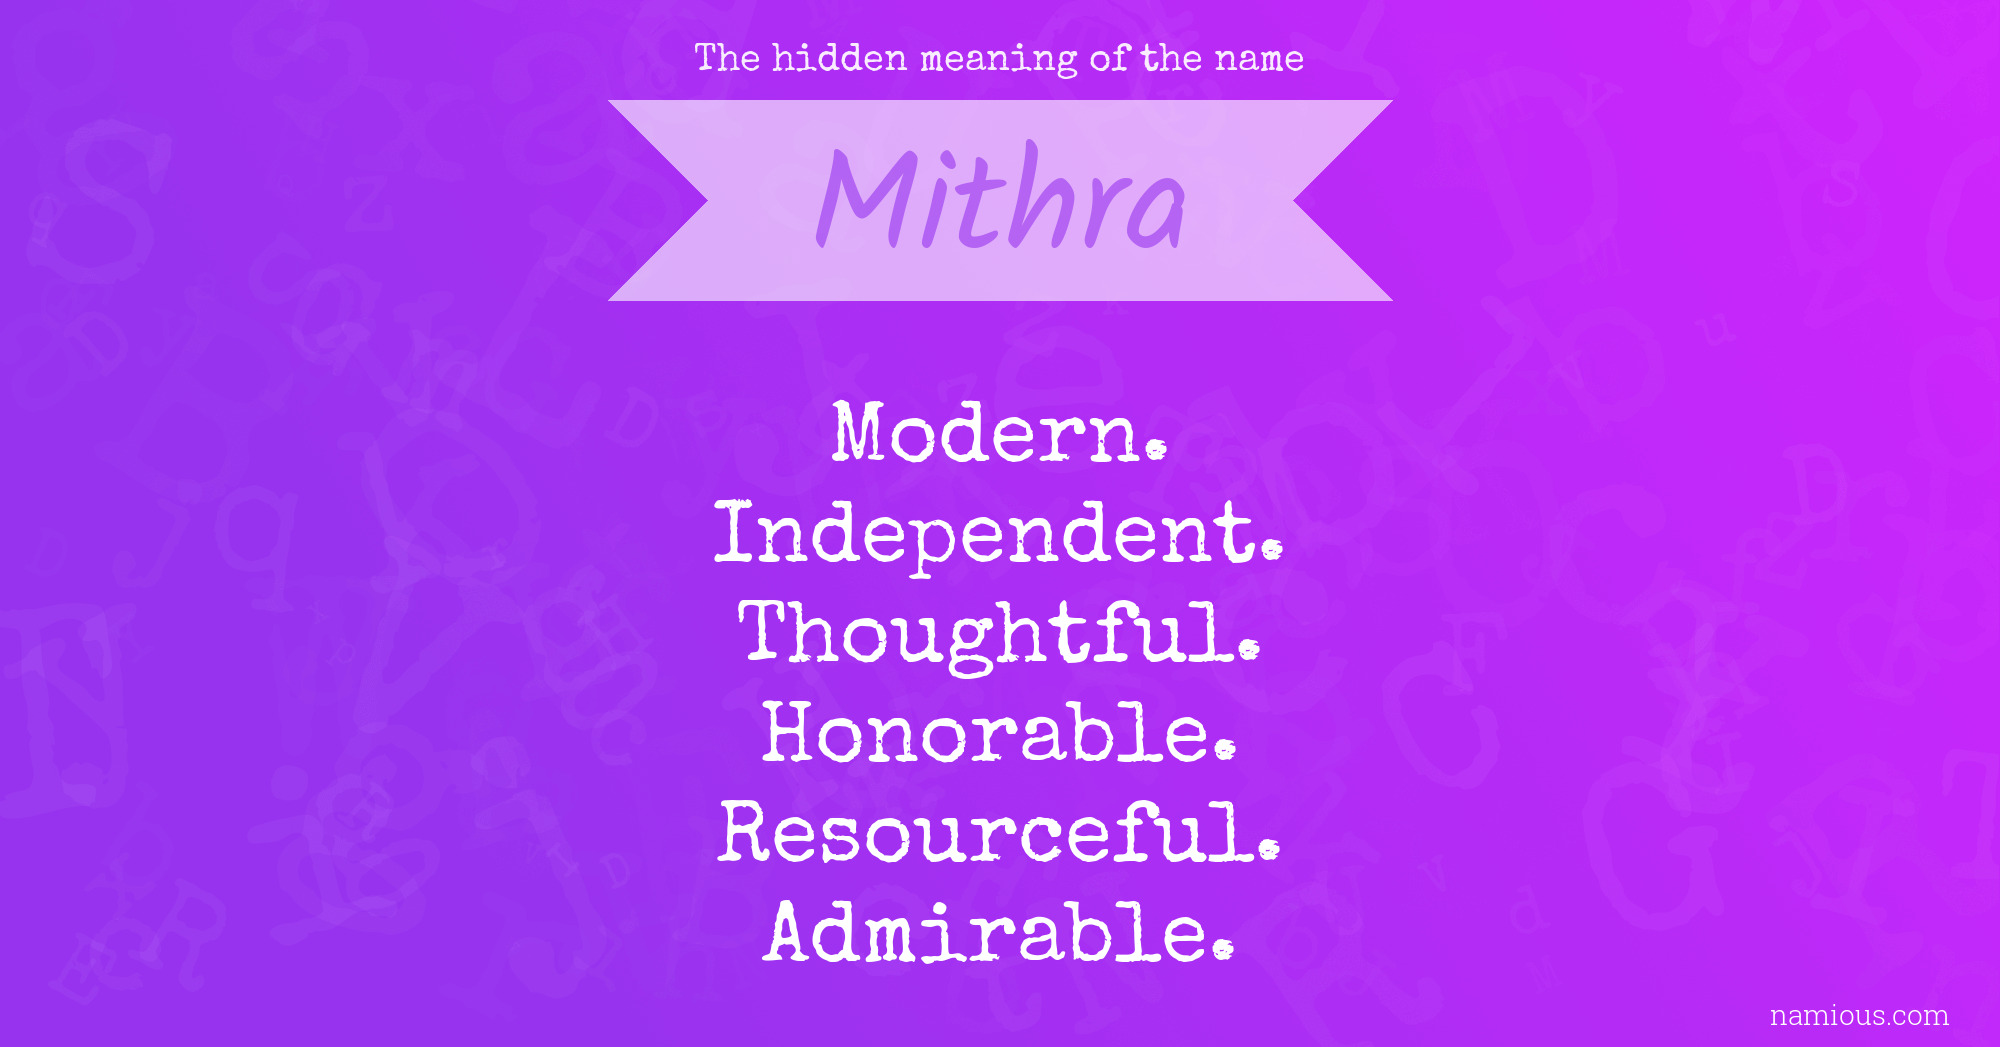 The hidden meaning of the name Mithra